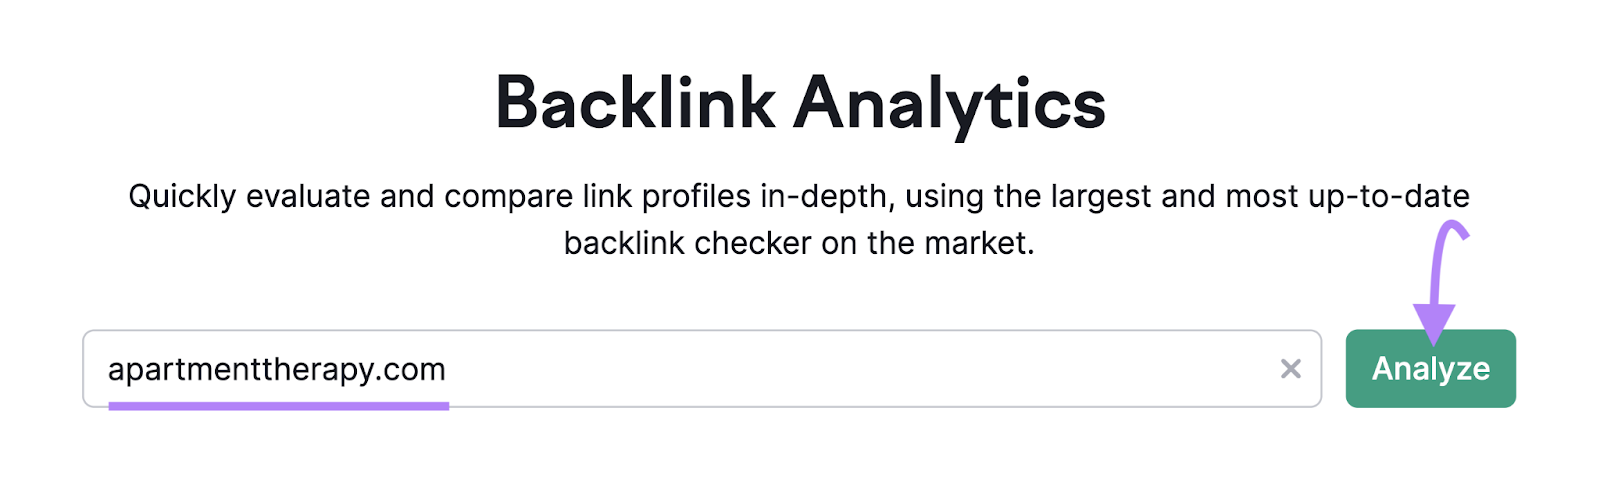 "apartmenttherapy.com" entered into the Backlink Analytics search bar